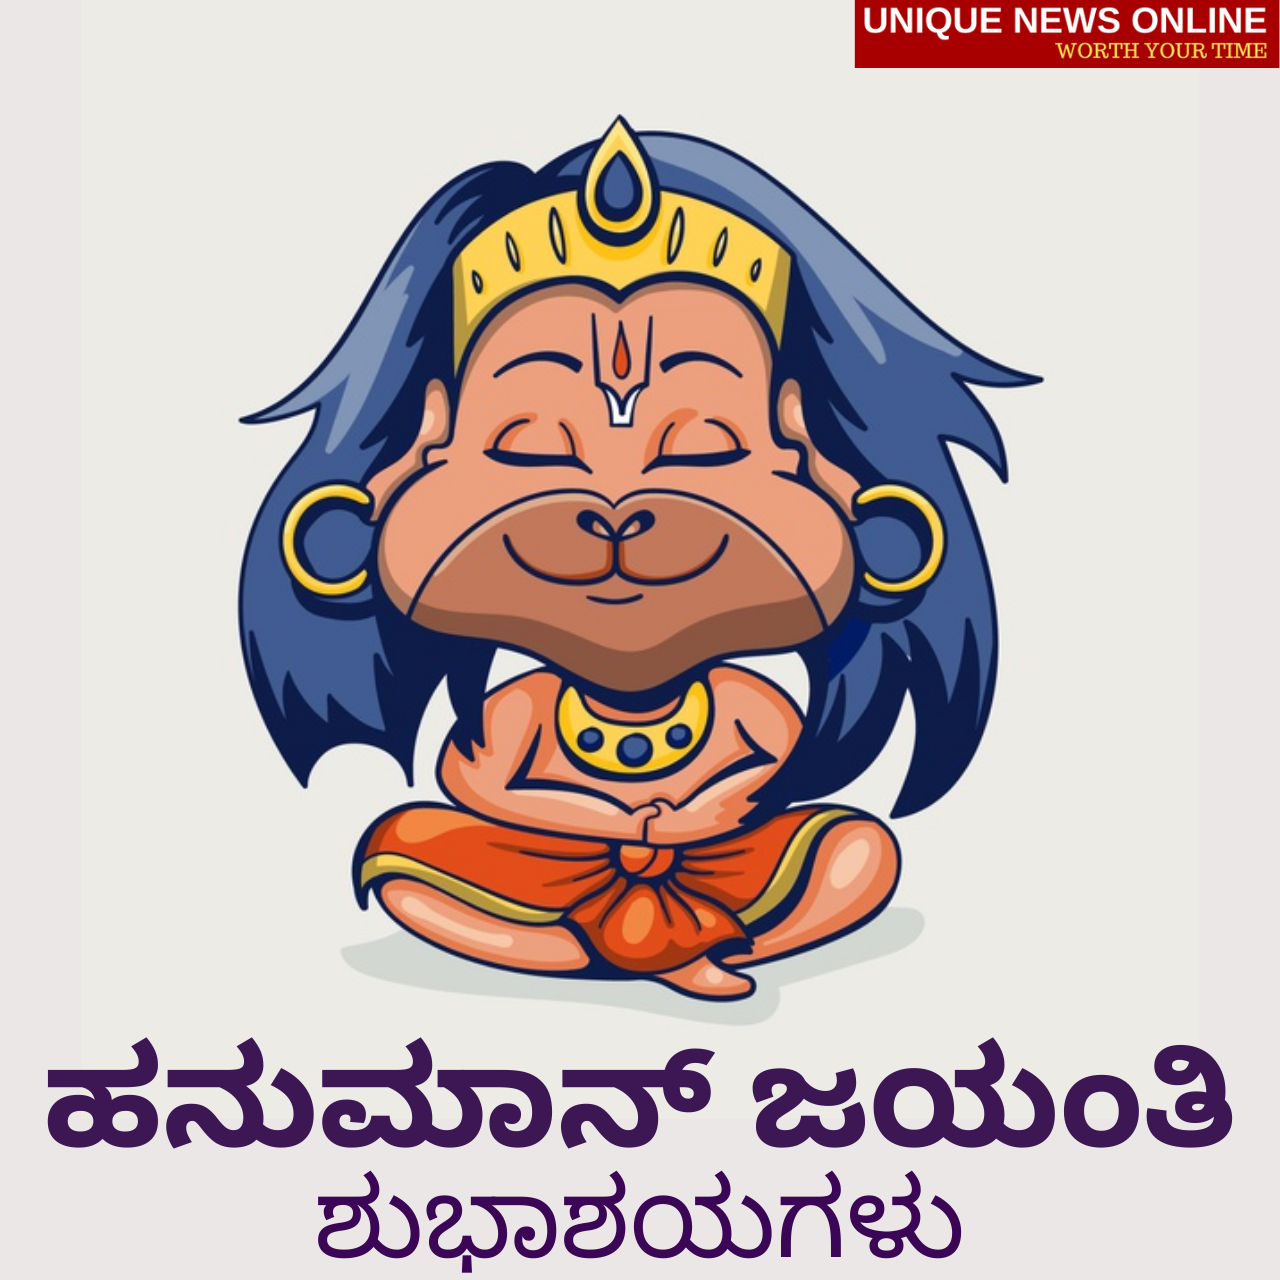 Happy Hanuman Jayanti 2021 Wishes in Kannada, Greetings, Images, Statu, Messages, and Quotes to Share on Hanuman Janmotsav